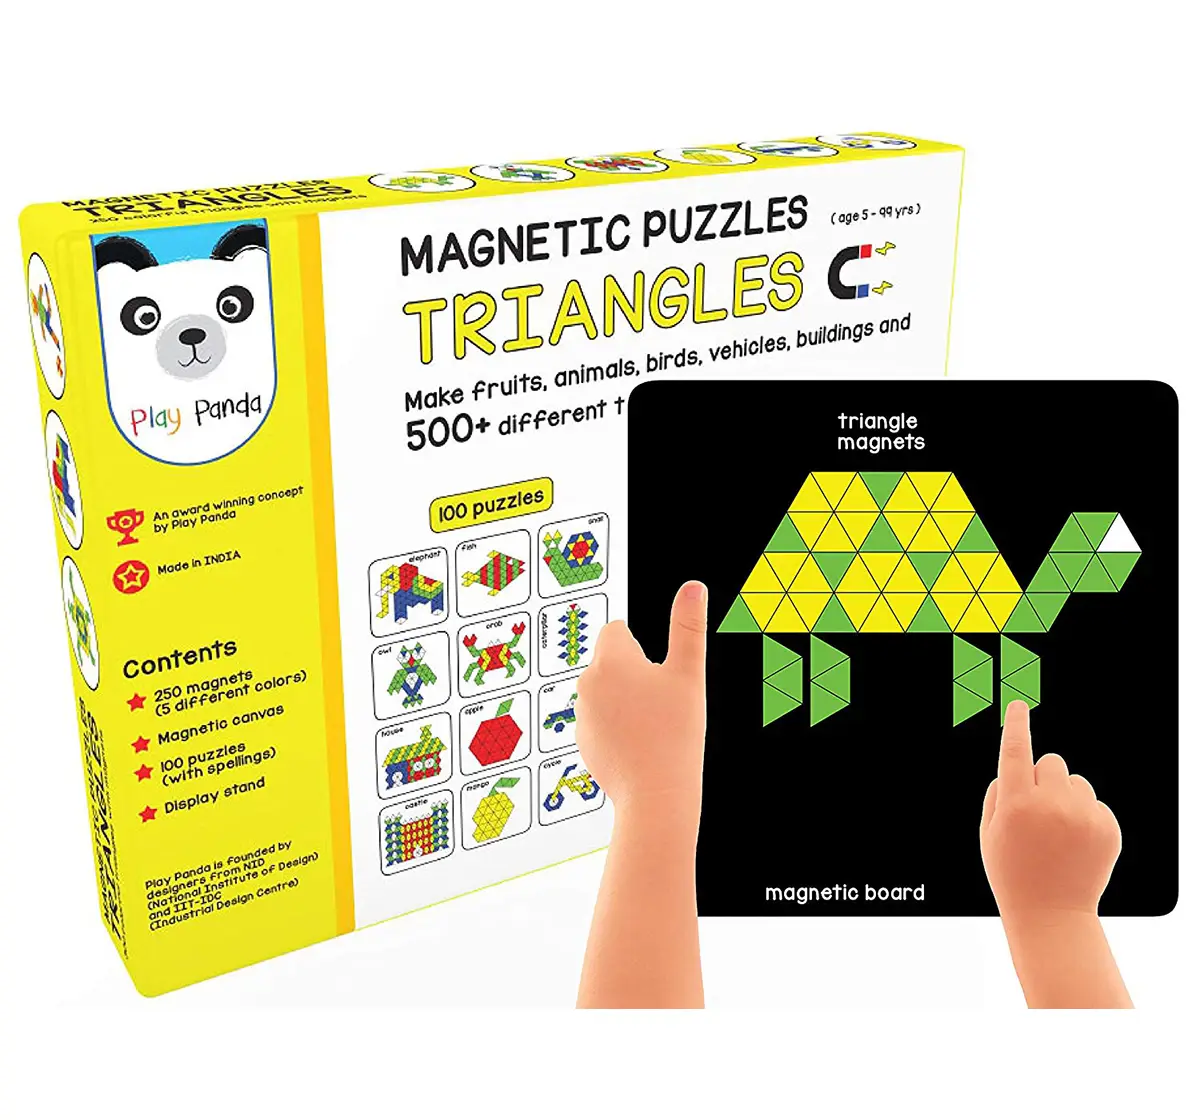 Buy Play Panda New Magnetic Puzzles : Triangles With 200 Colorful Magnets,  100 Puzzle Book, Magnetic Board And Display Stand Puzzles for Kids Age 5Y+